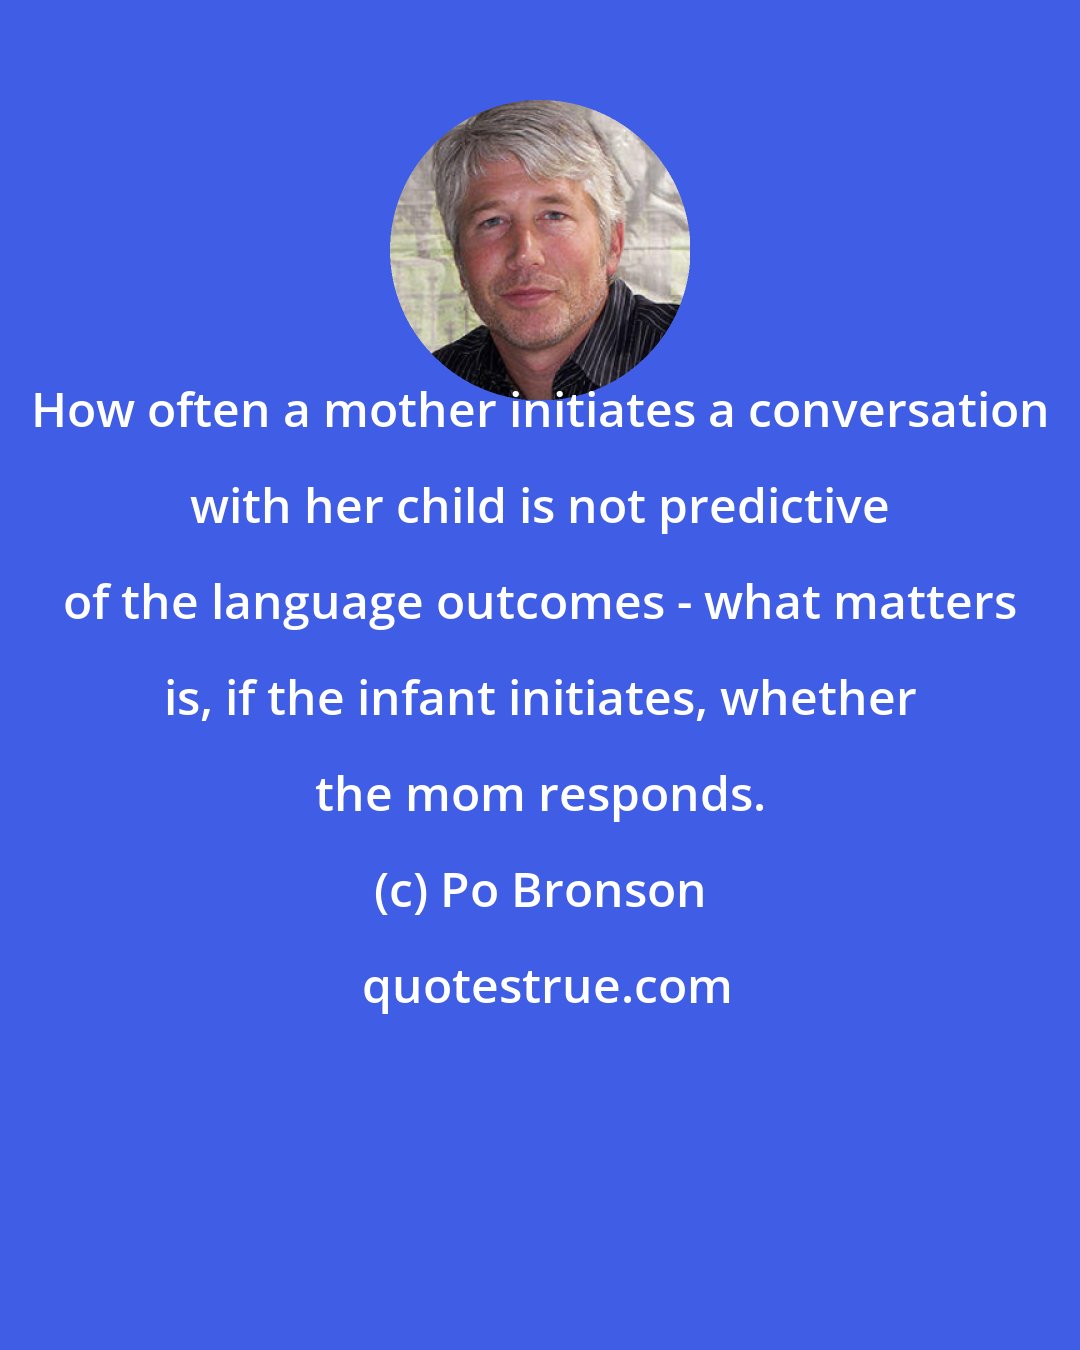 Po Bronson: How often a mother initiates a conversation with her child is not predictive of the language outcomes - what matters is, if the infant initiates, whether the mom responds.